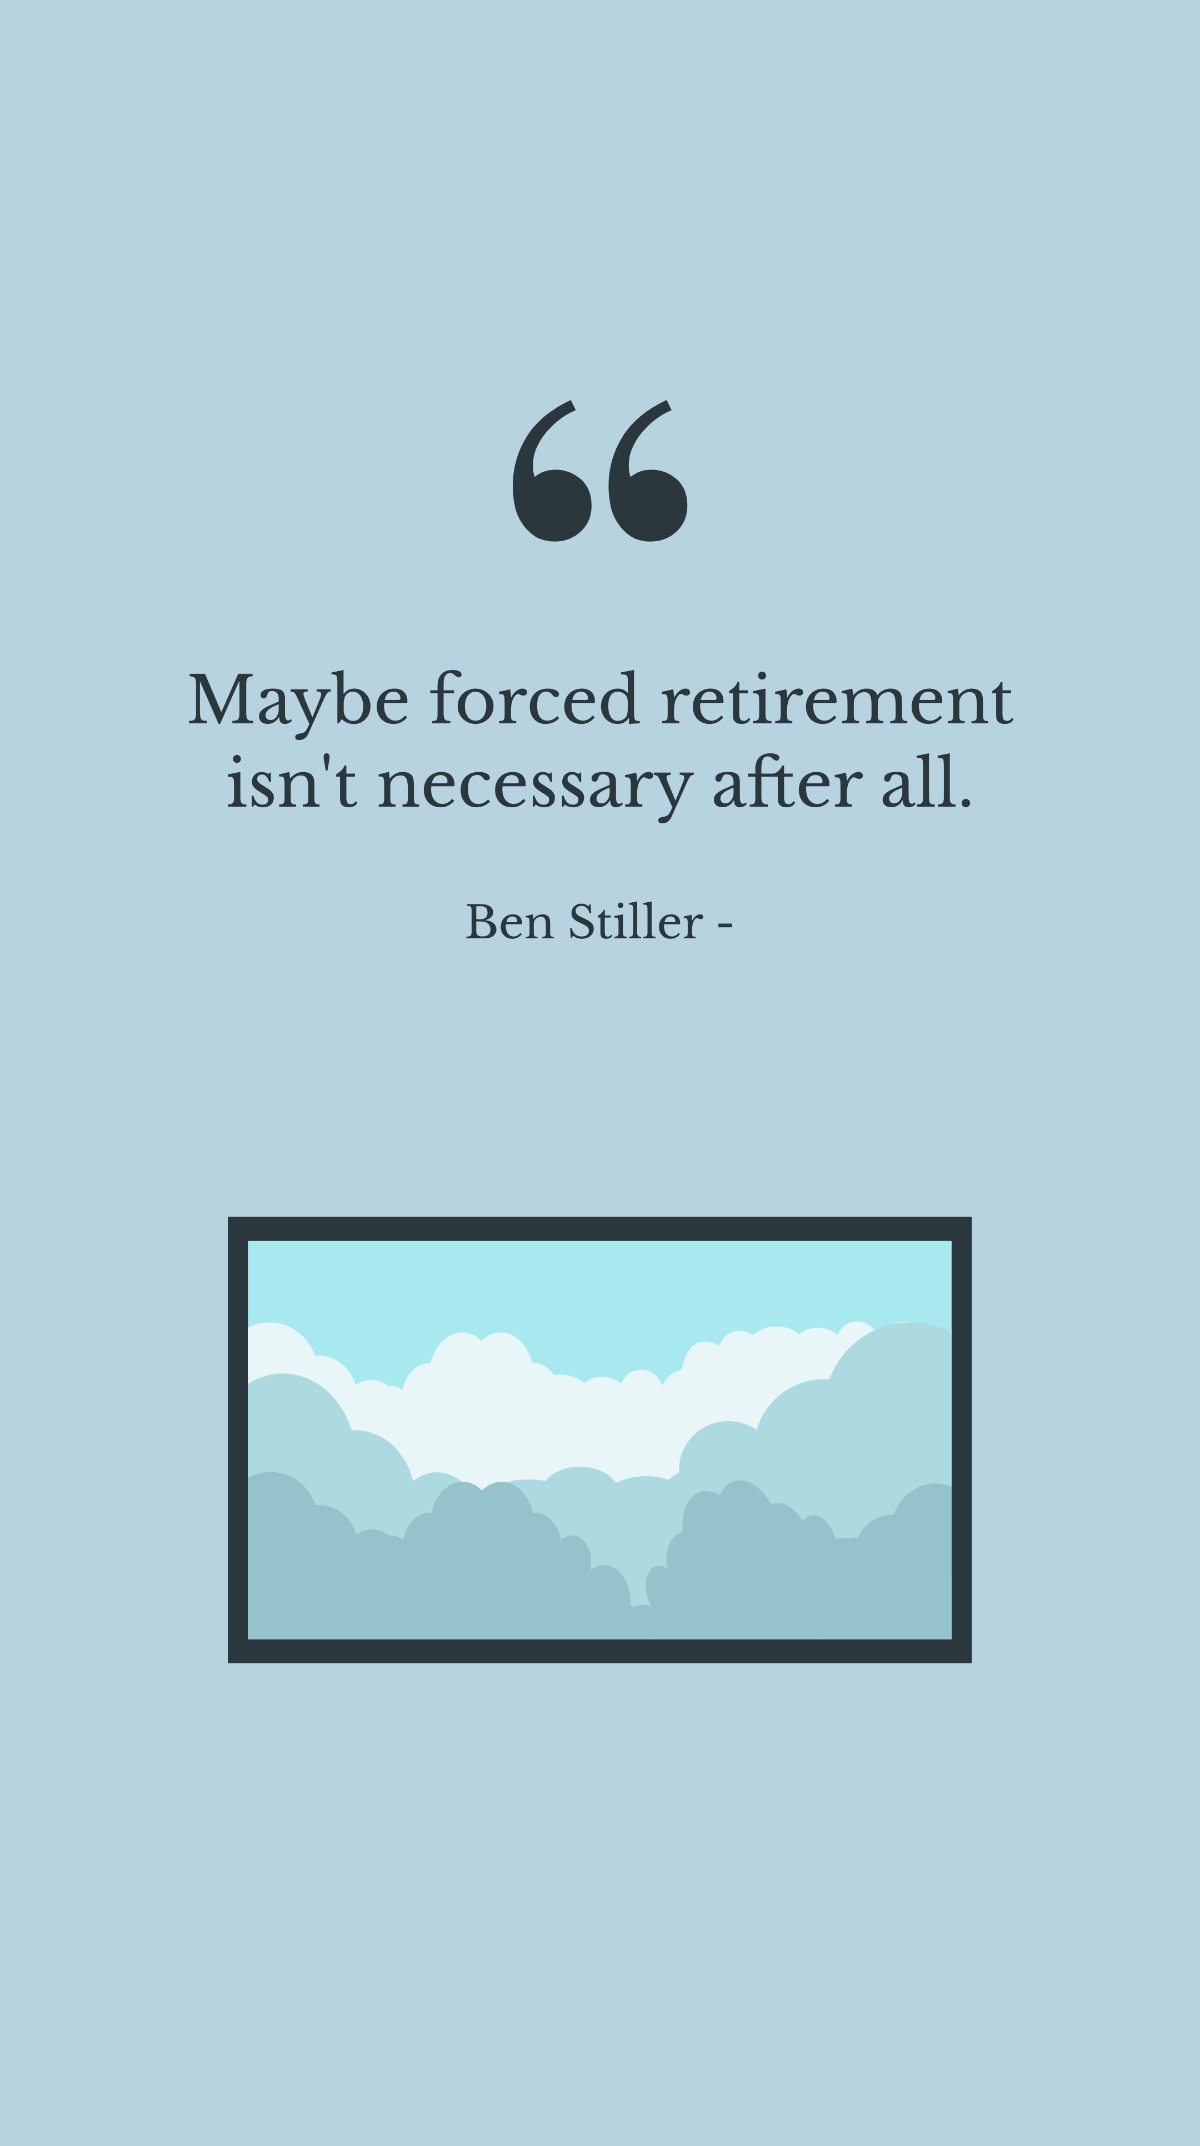 Ben Stiller - Maybe forced retirement isn't necessary after all.